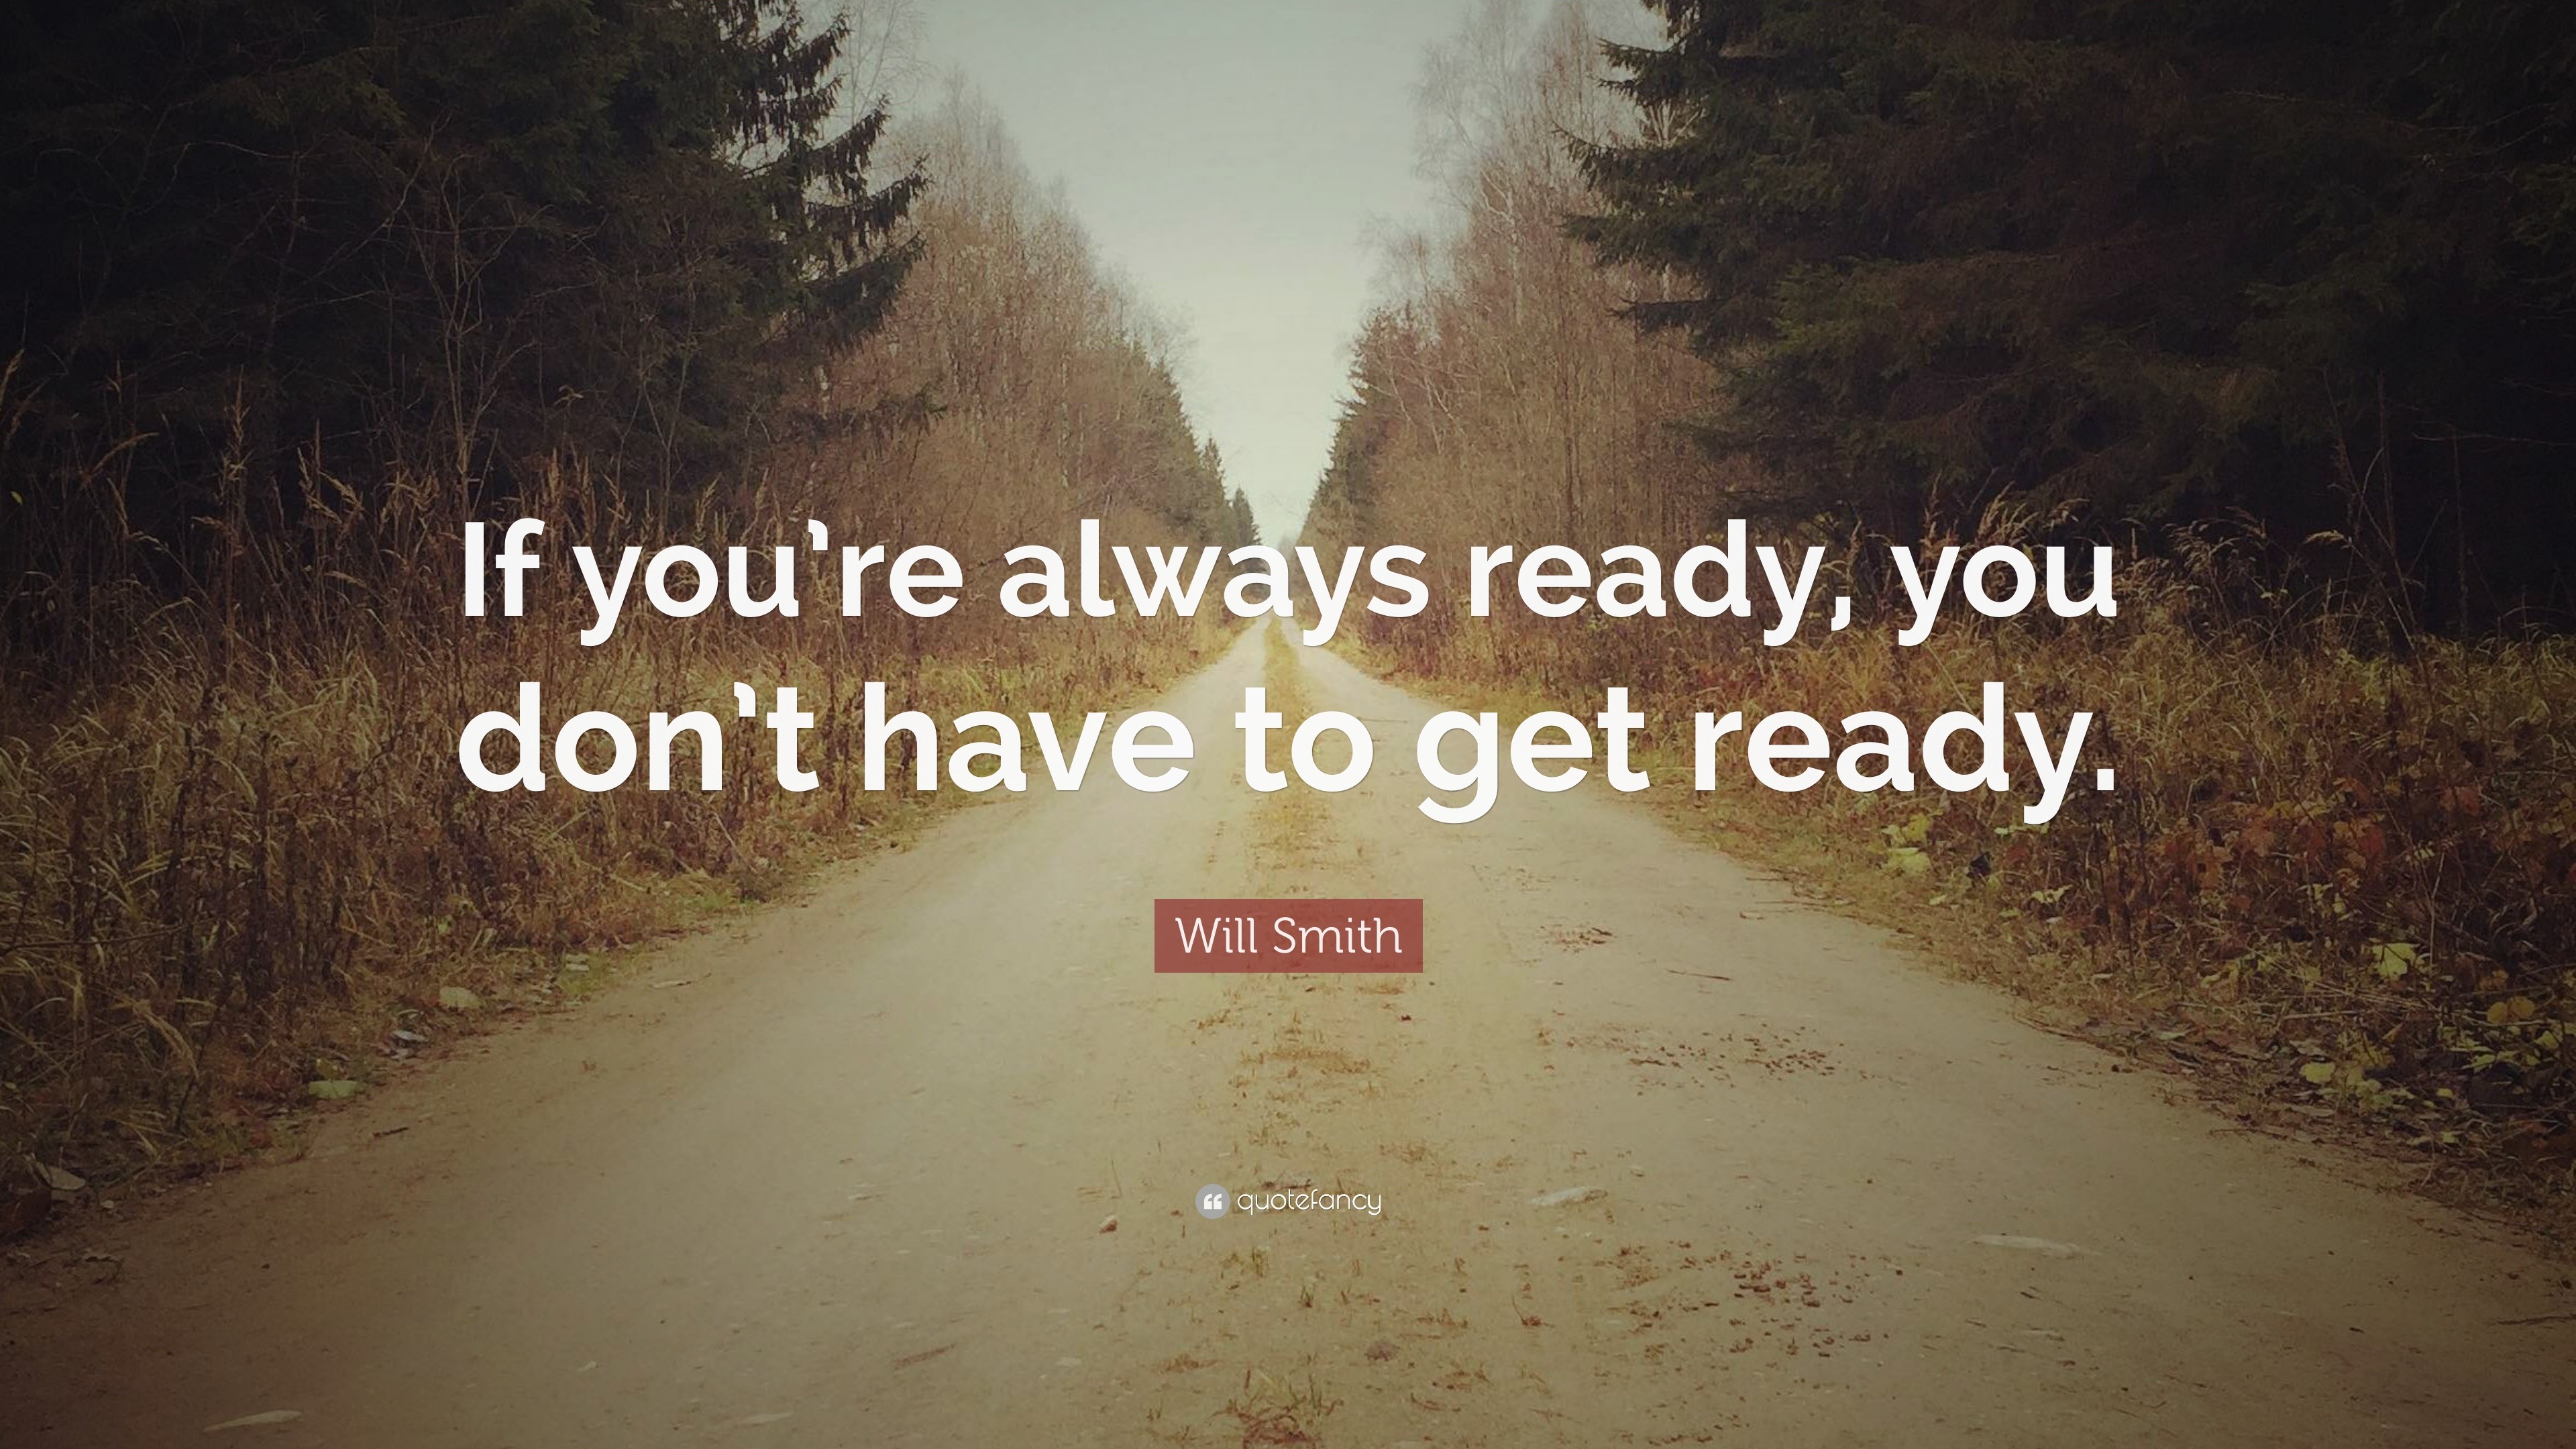 https://quotefancy.com/media/wallpaper/3840x2160/120278-Will-Smith-Quote-If-you-re-always-ready-you-don-t-have-to-get.jpg